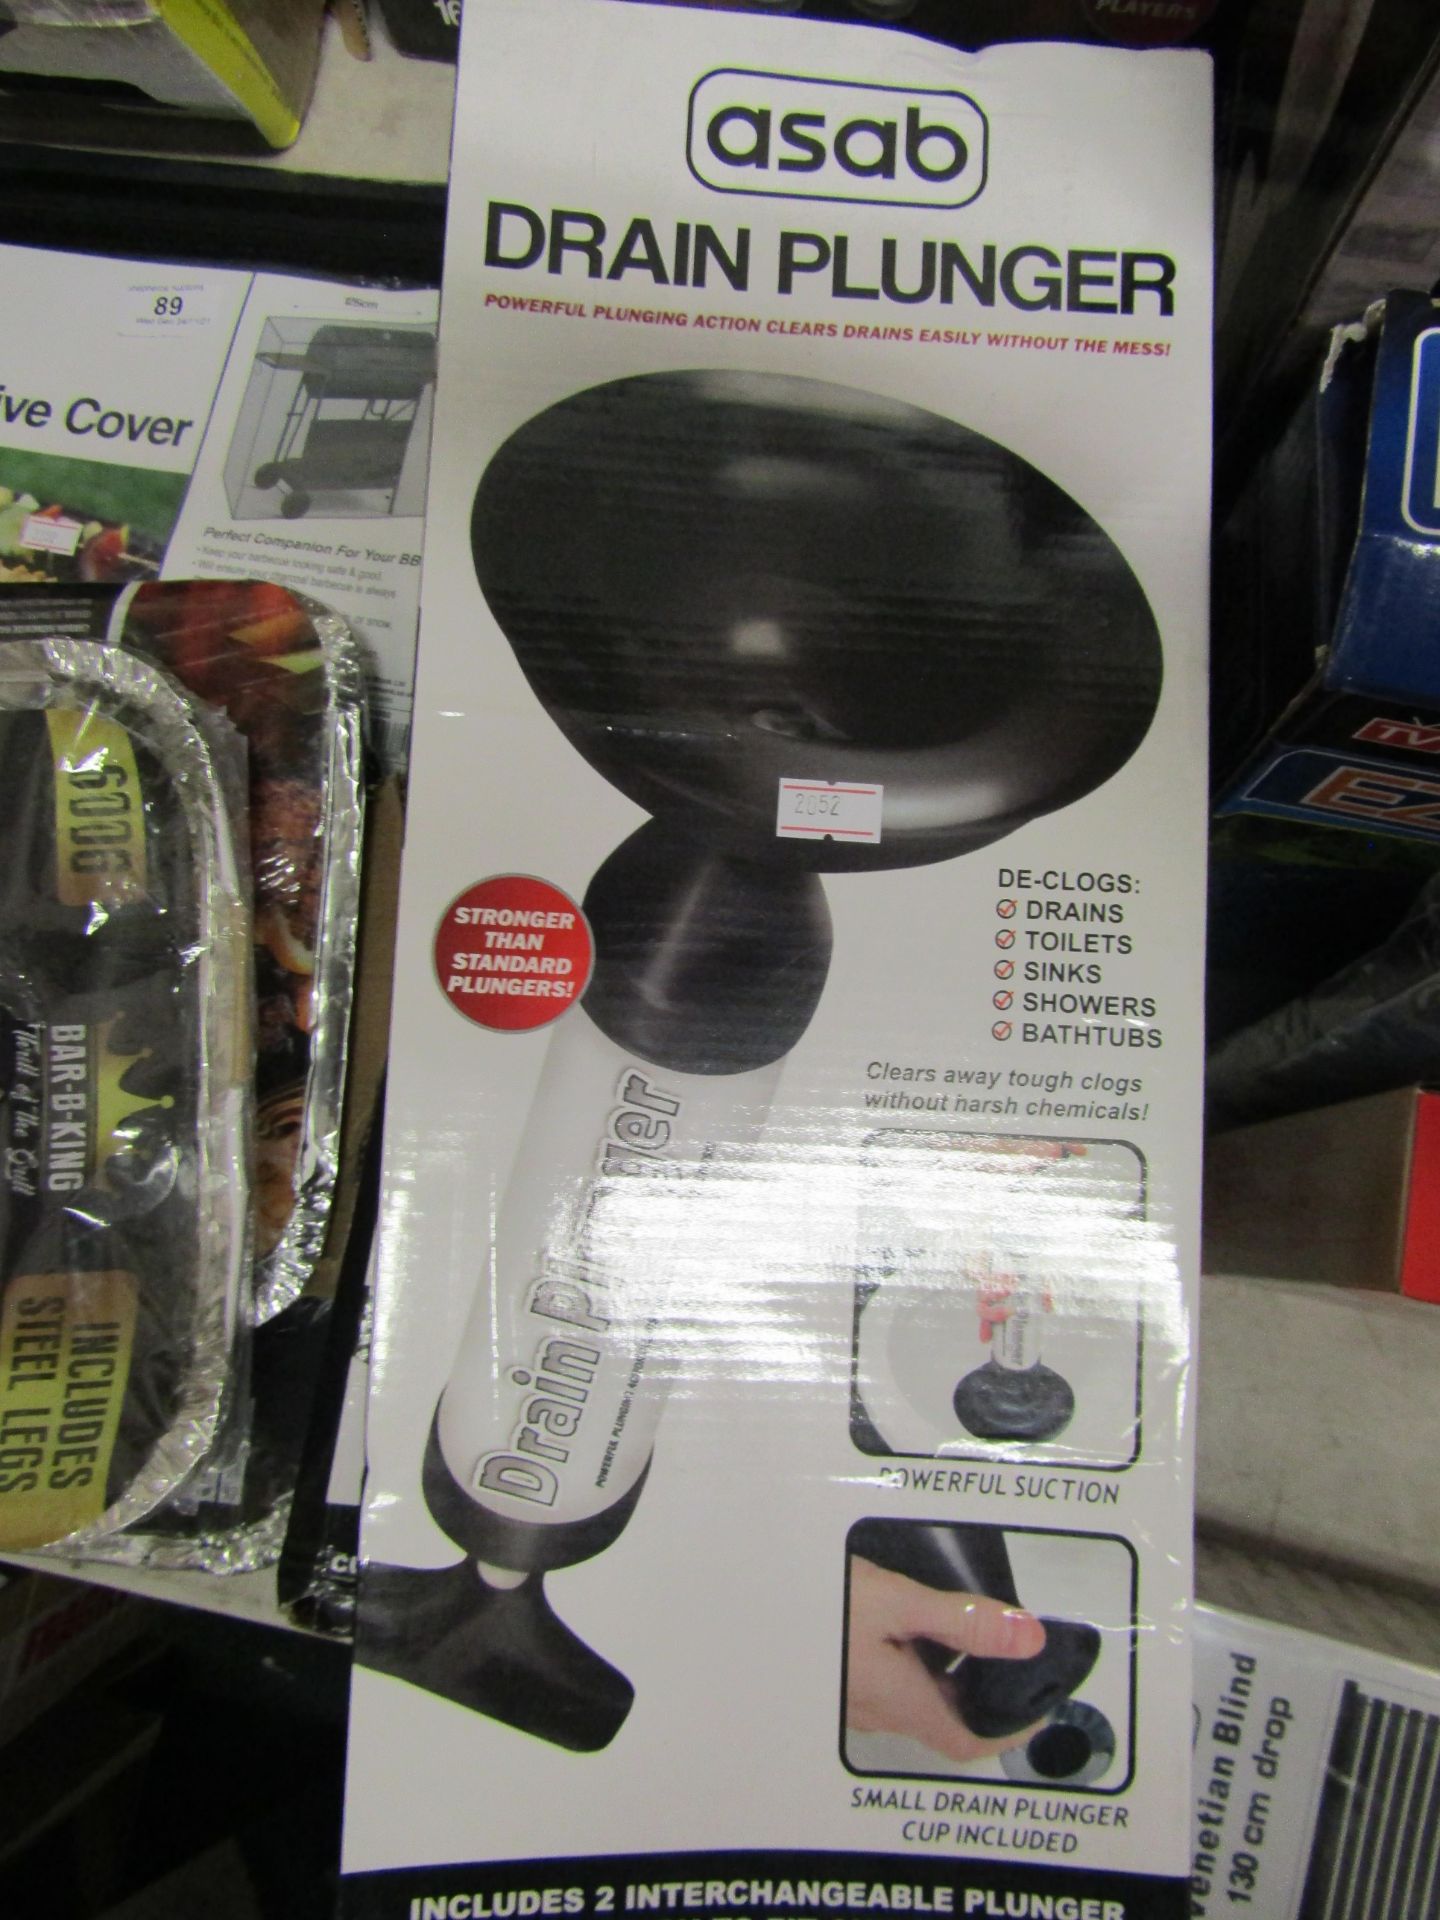 1 x Asab Drain Plunger packaged new